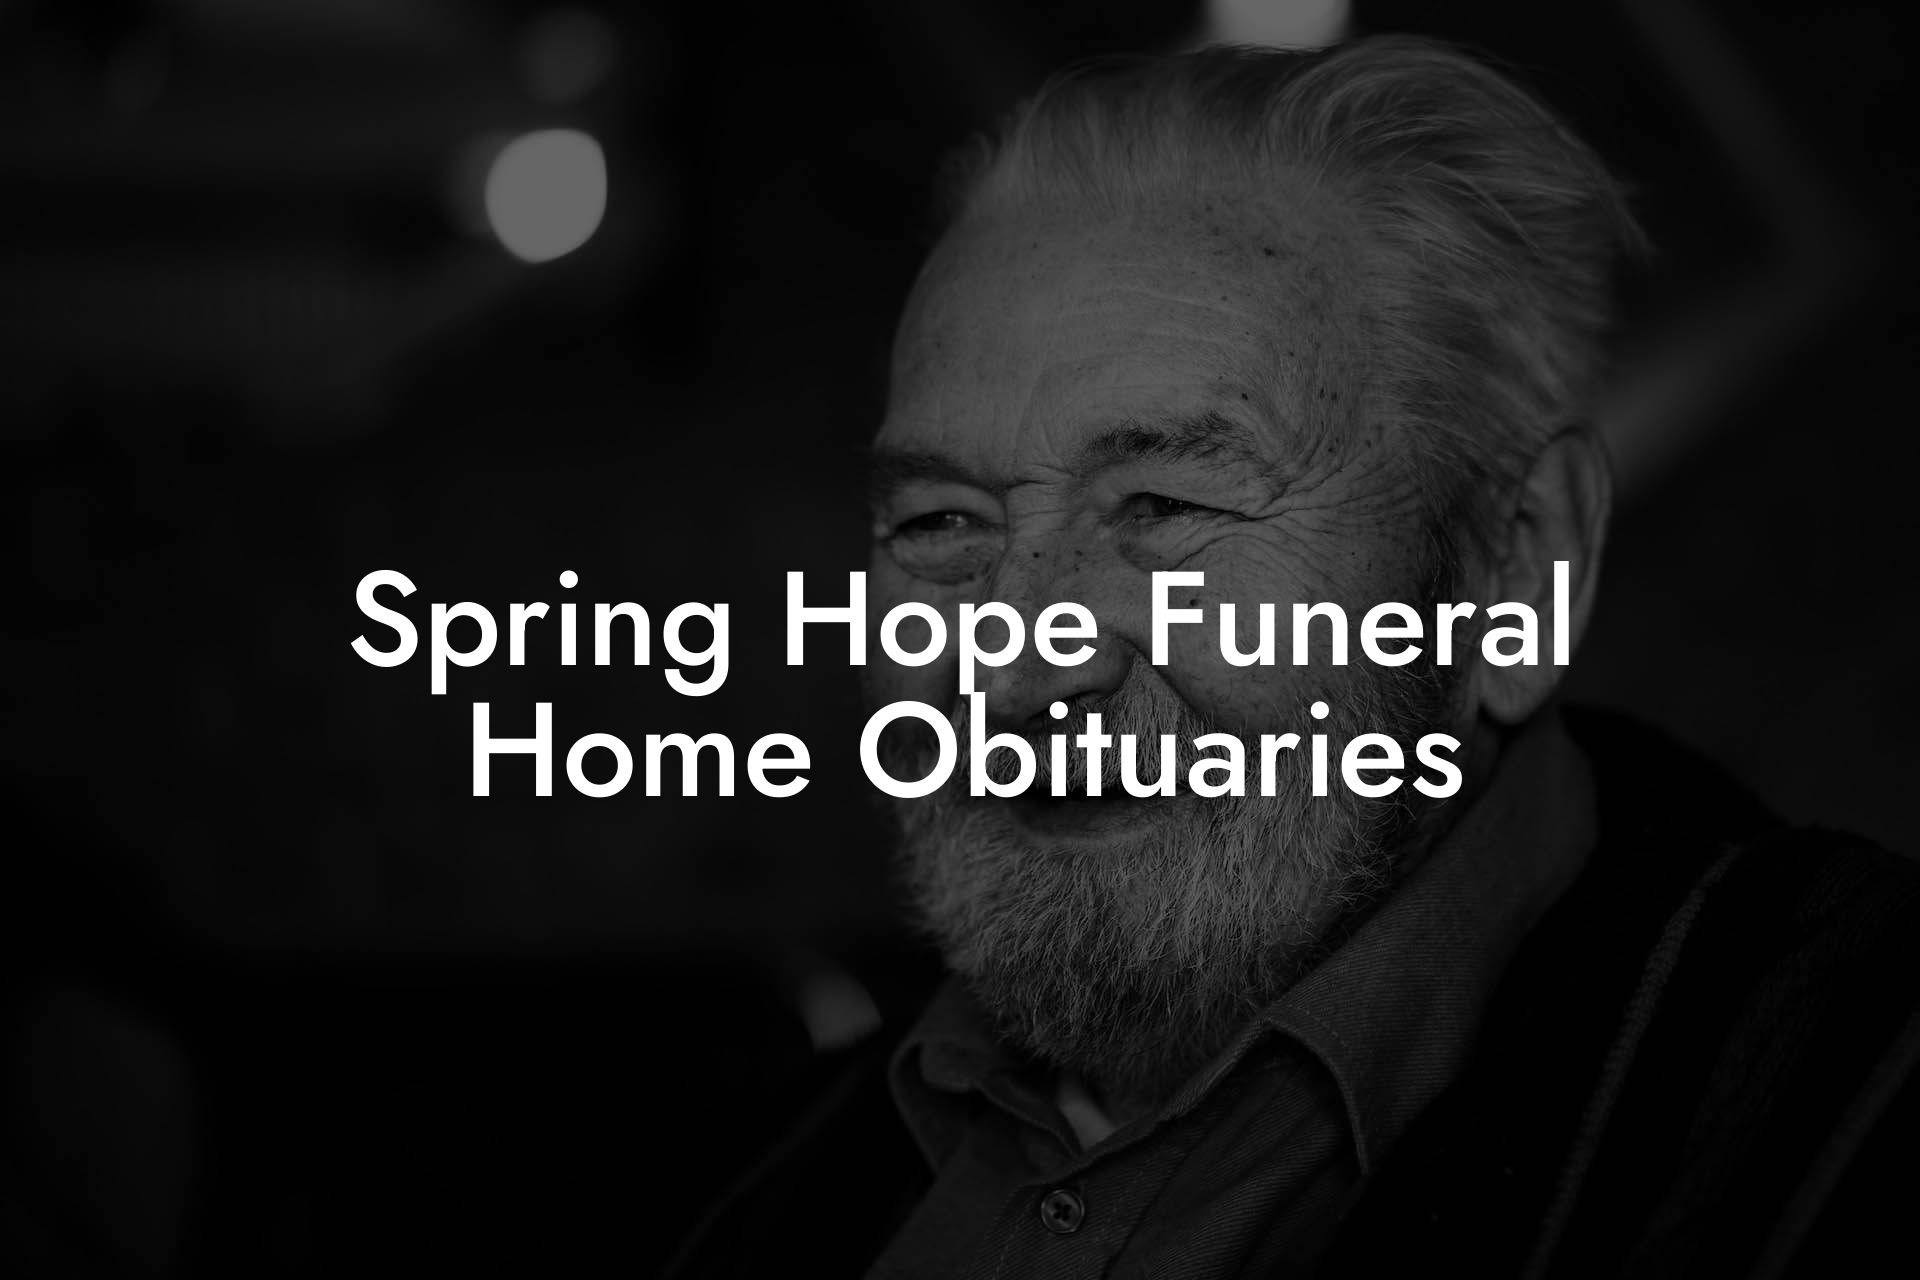 Spring Hope Funeral Home Obituaries